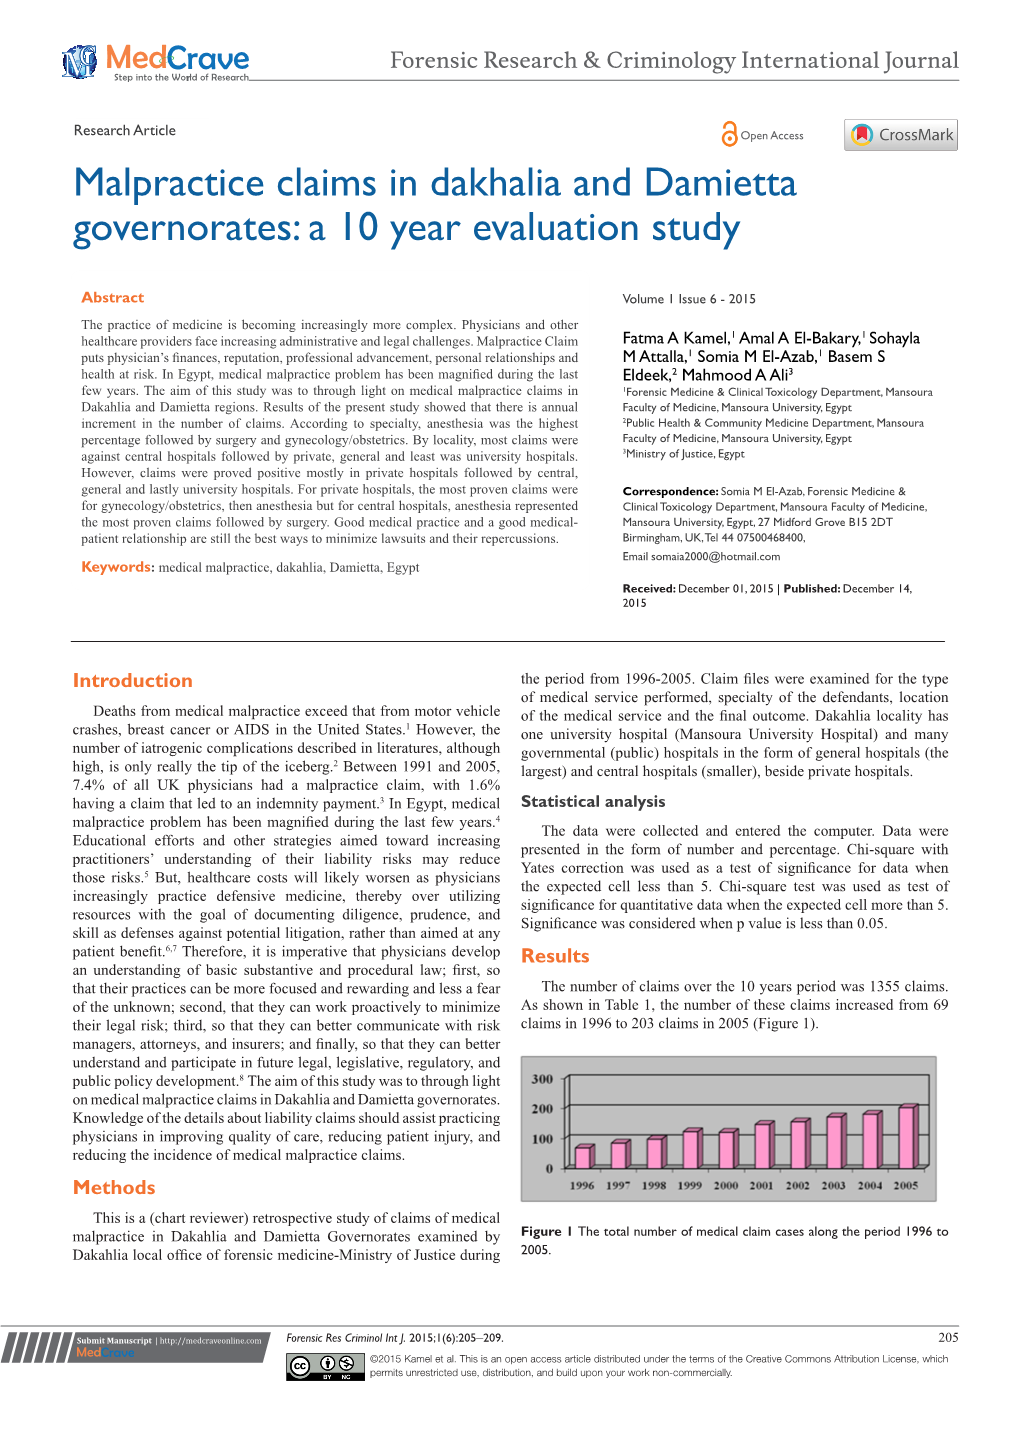 Malpractice Claims in Dakhalia and Damietta Governorates: a 10 Year Evaluation Study